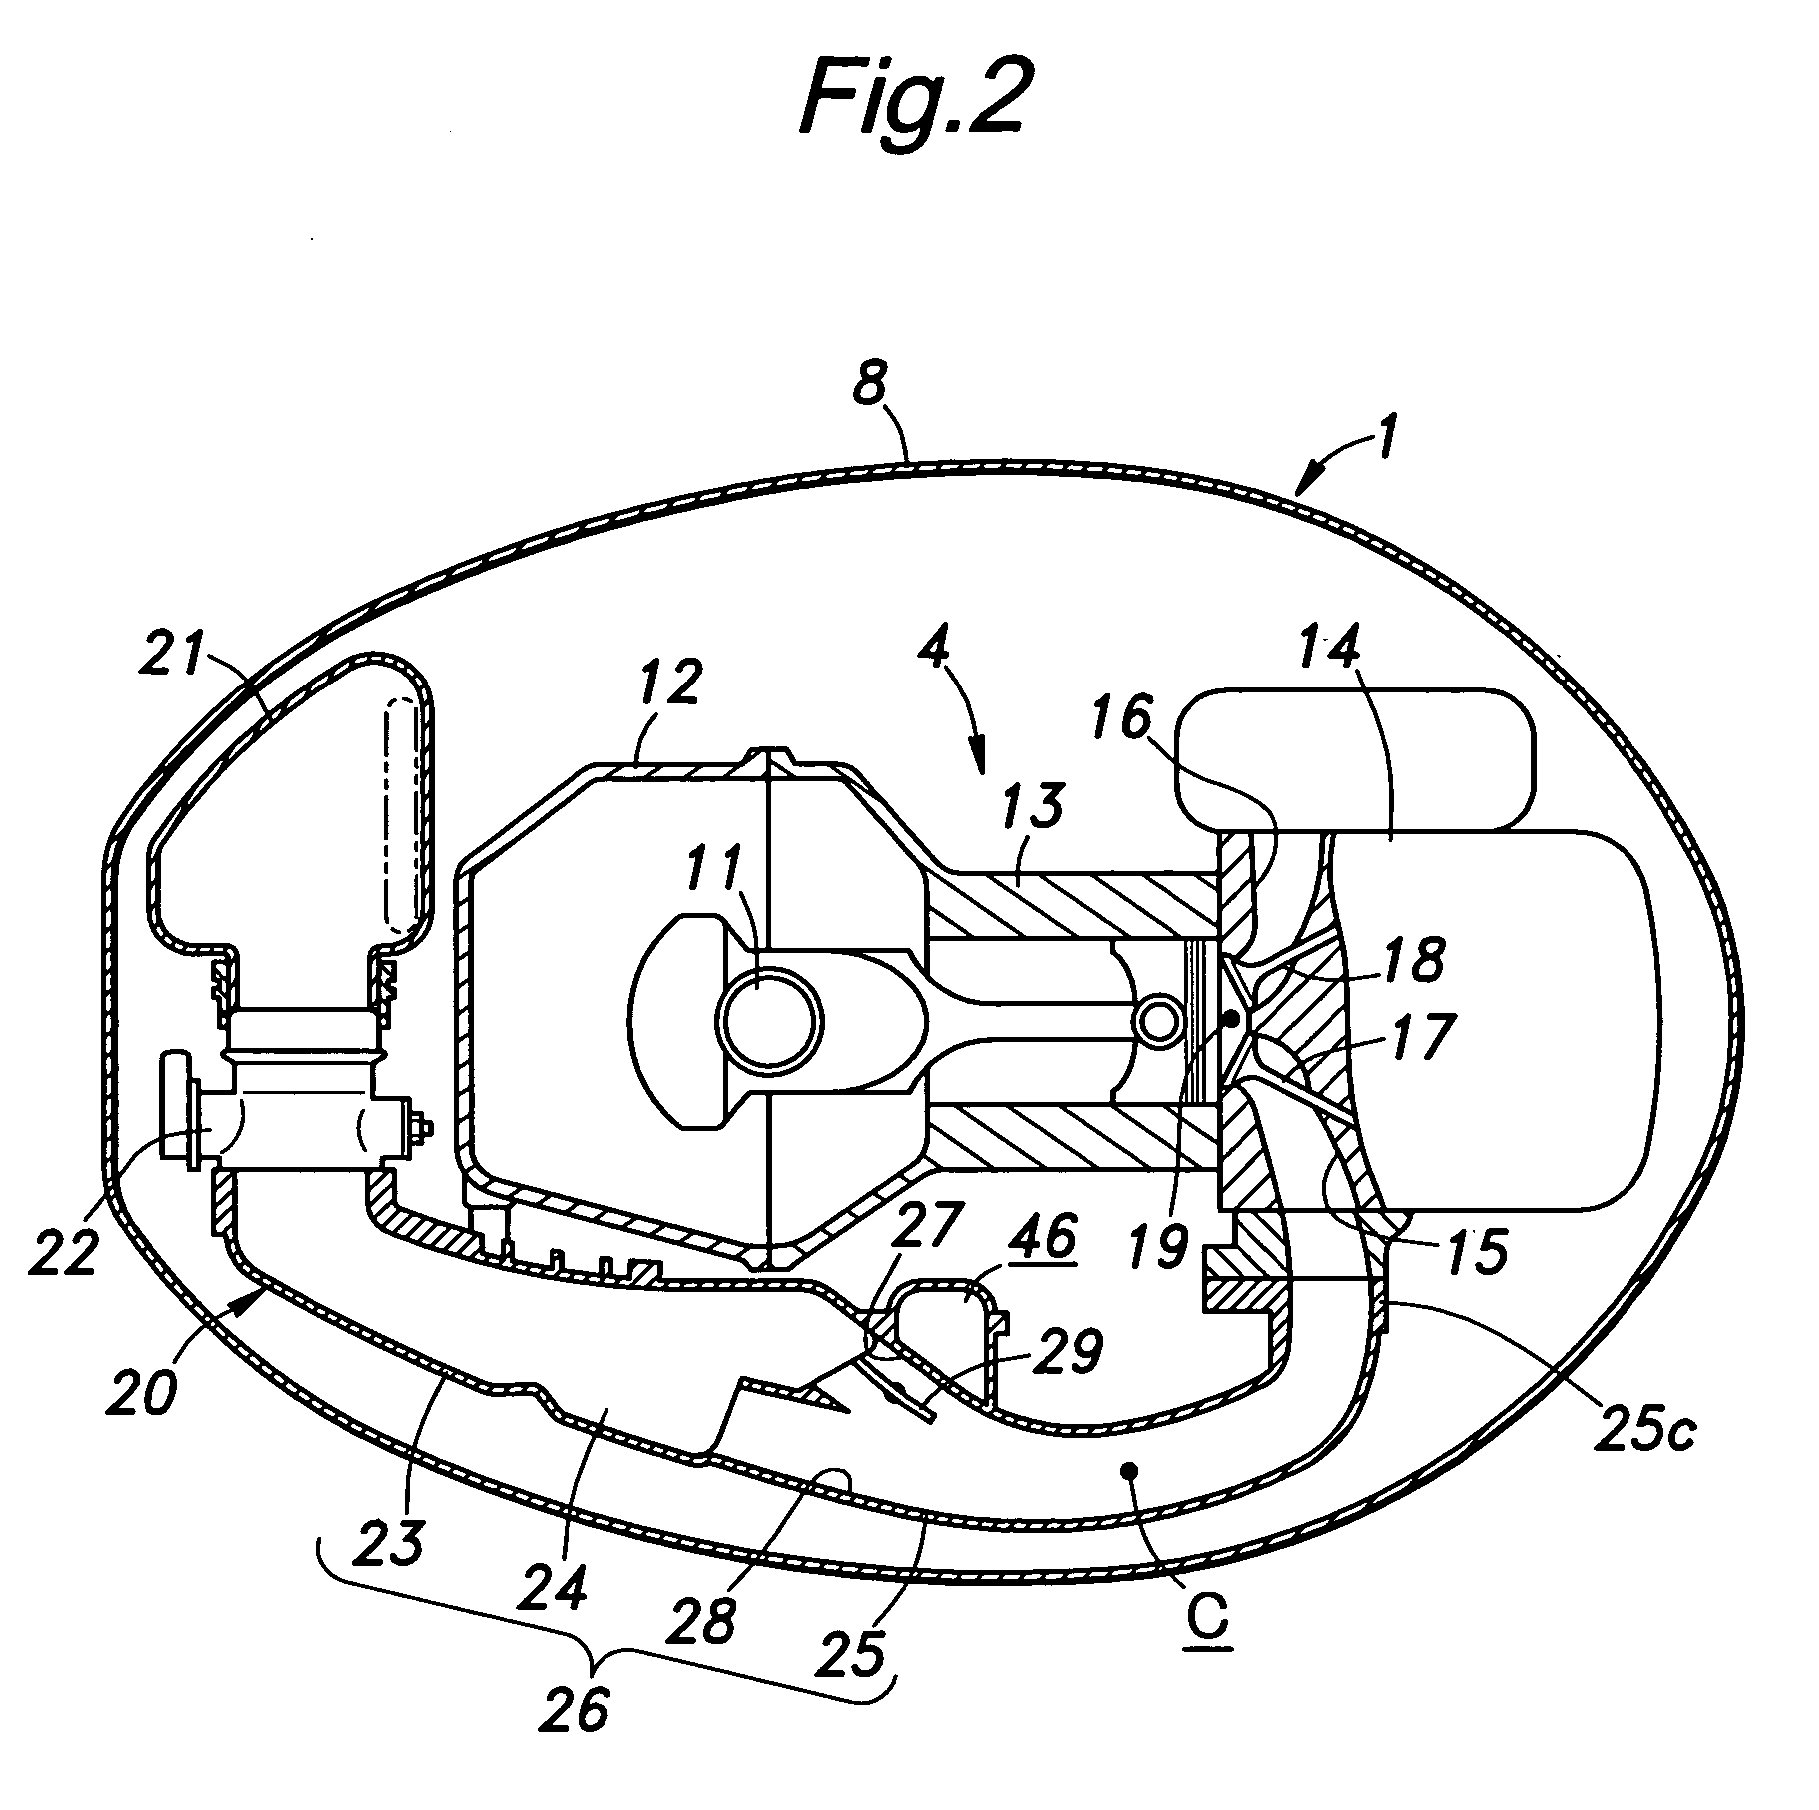 Dual port intake device for an internal combustion engine formed by injection molding